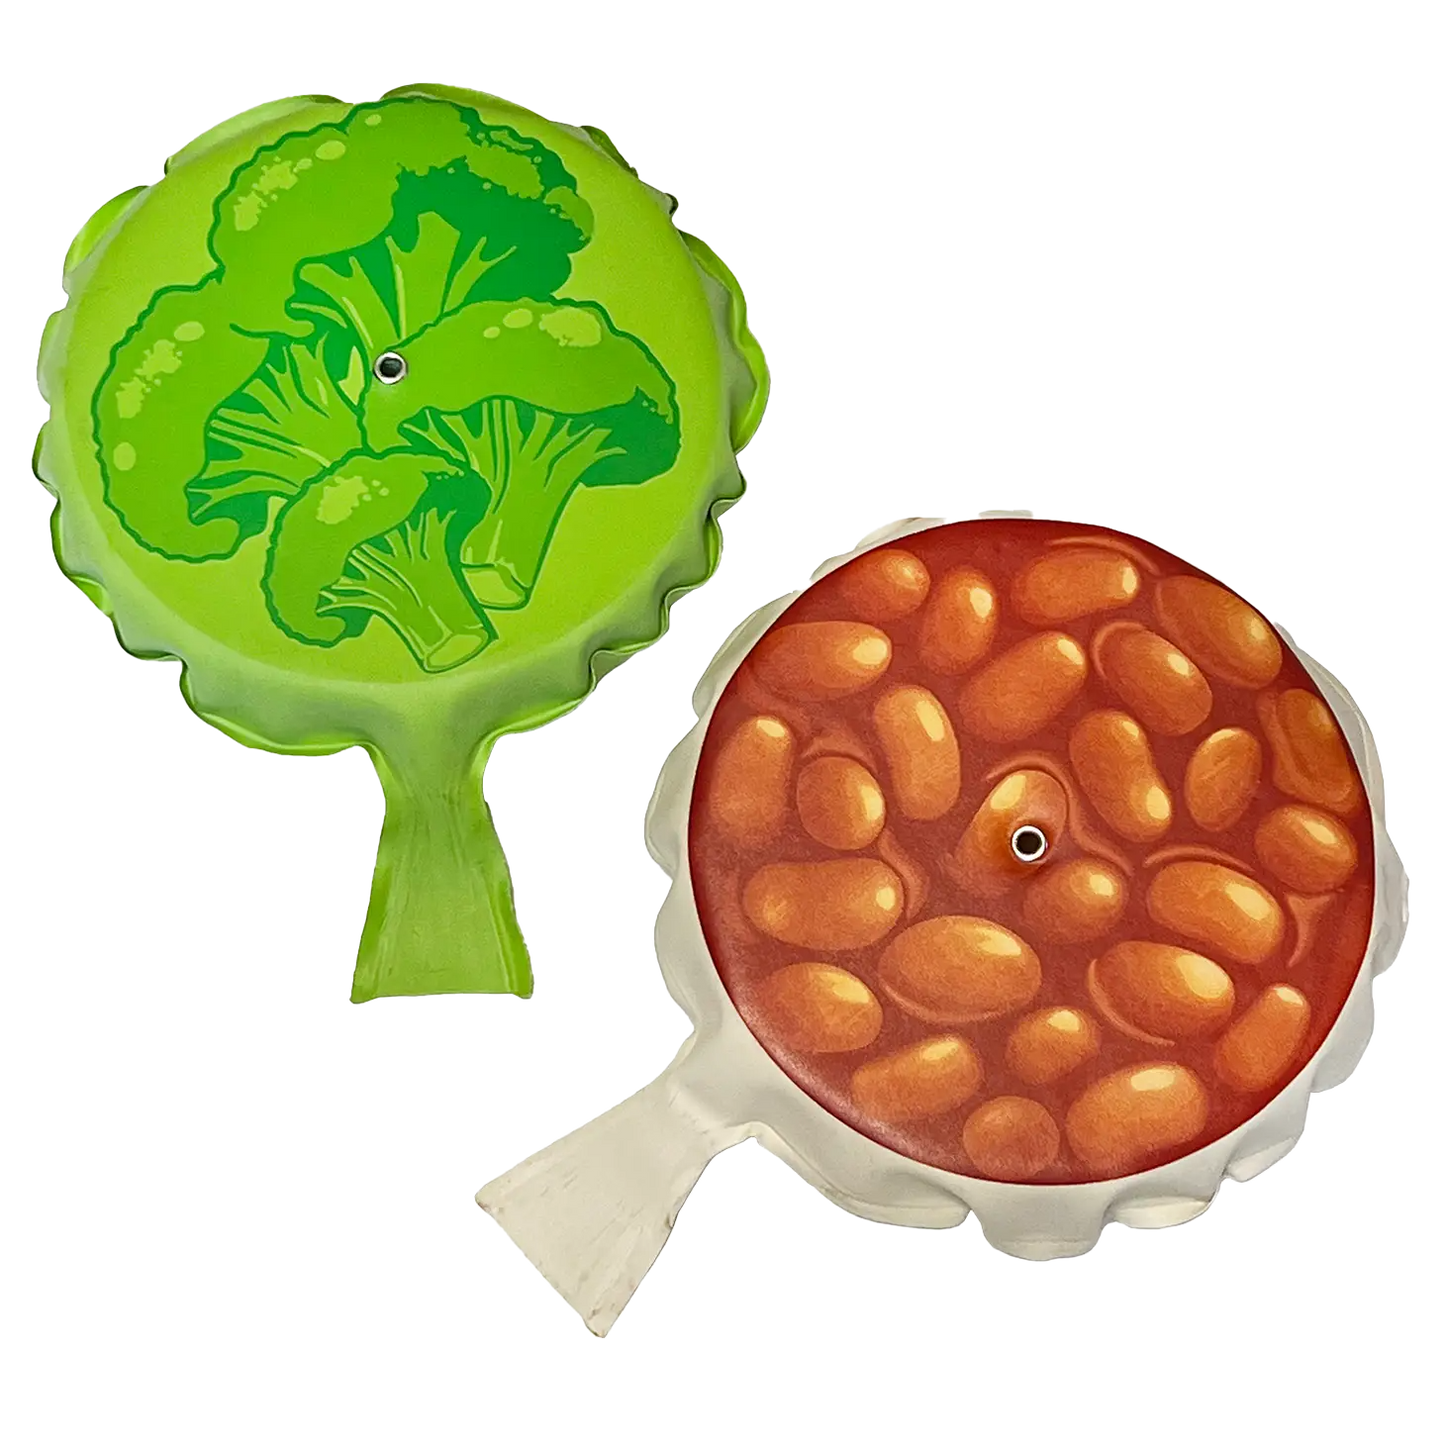 Broccoli & Baked Beans Whoopee Cushions